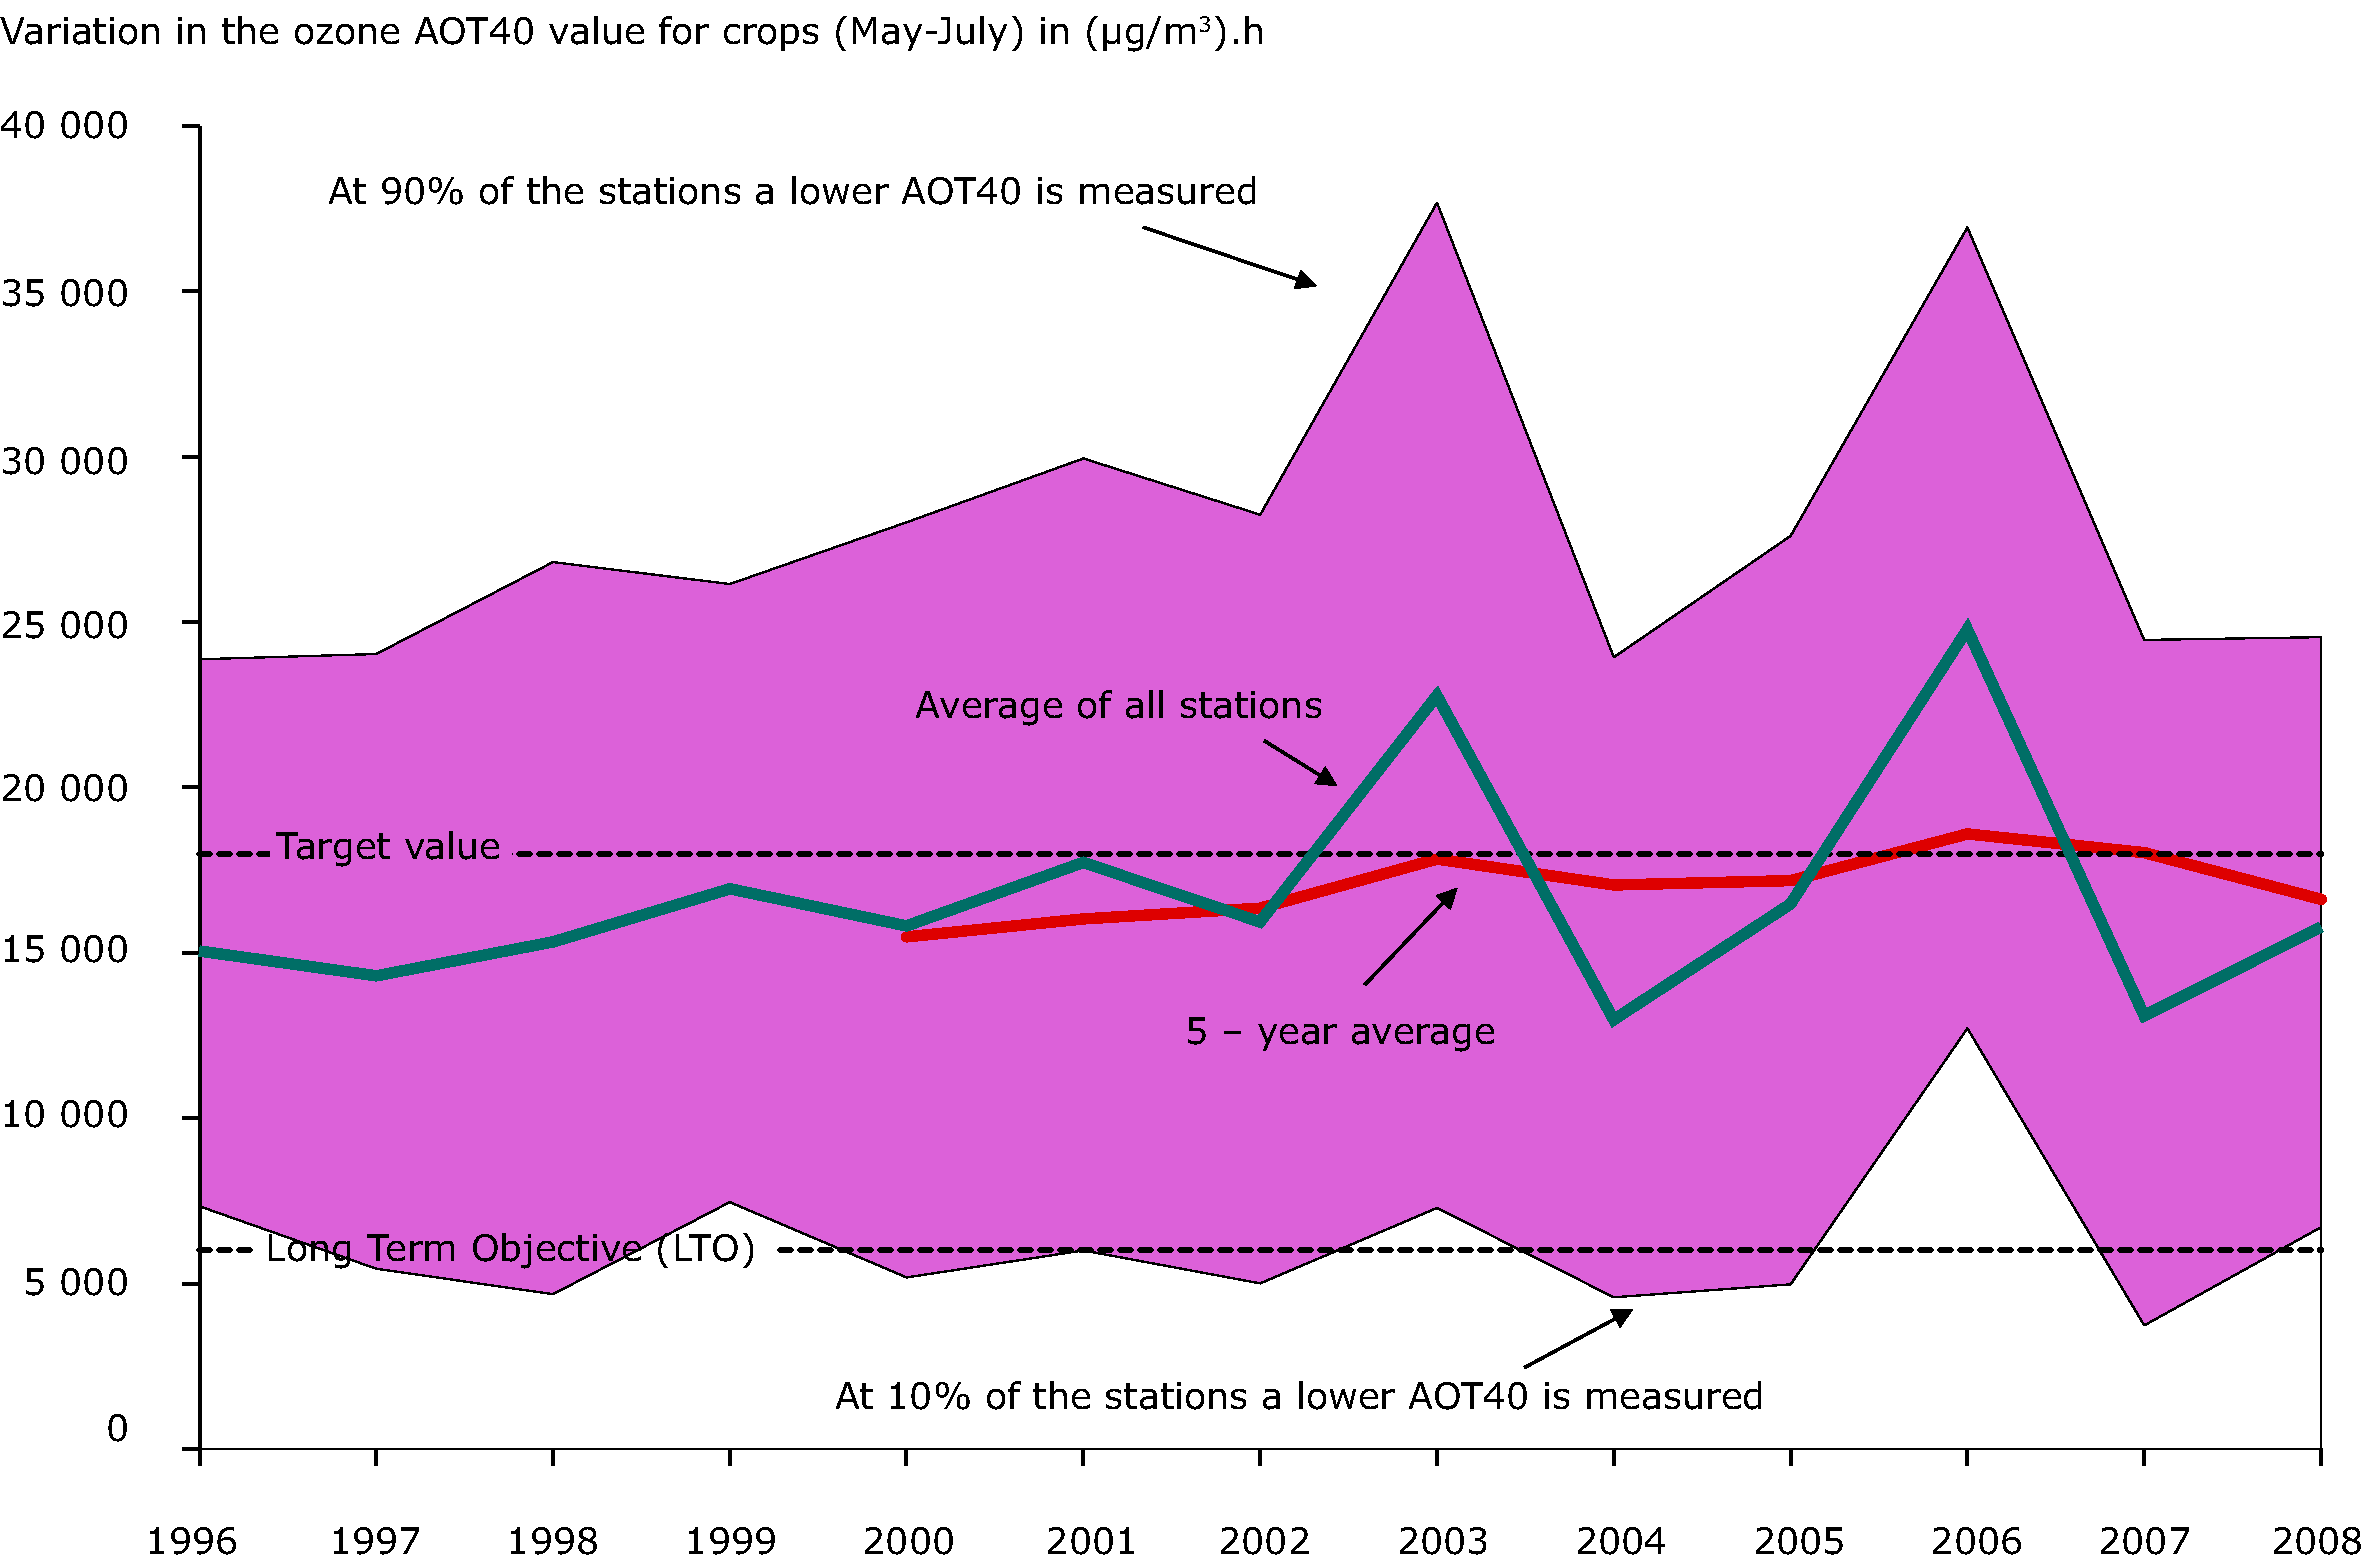 Annual variation in the ozone AOT40 value for crops (May-July) in (μg/m³).h, 1996-2008